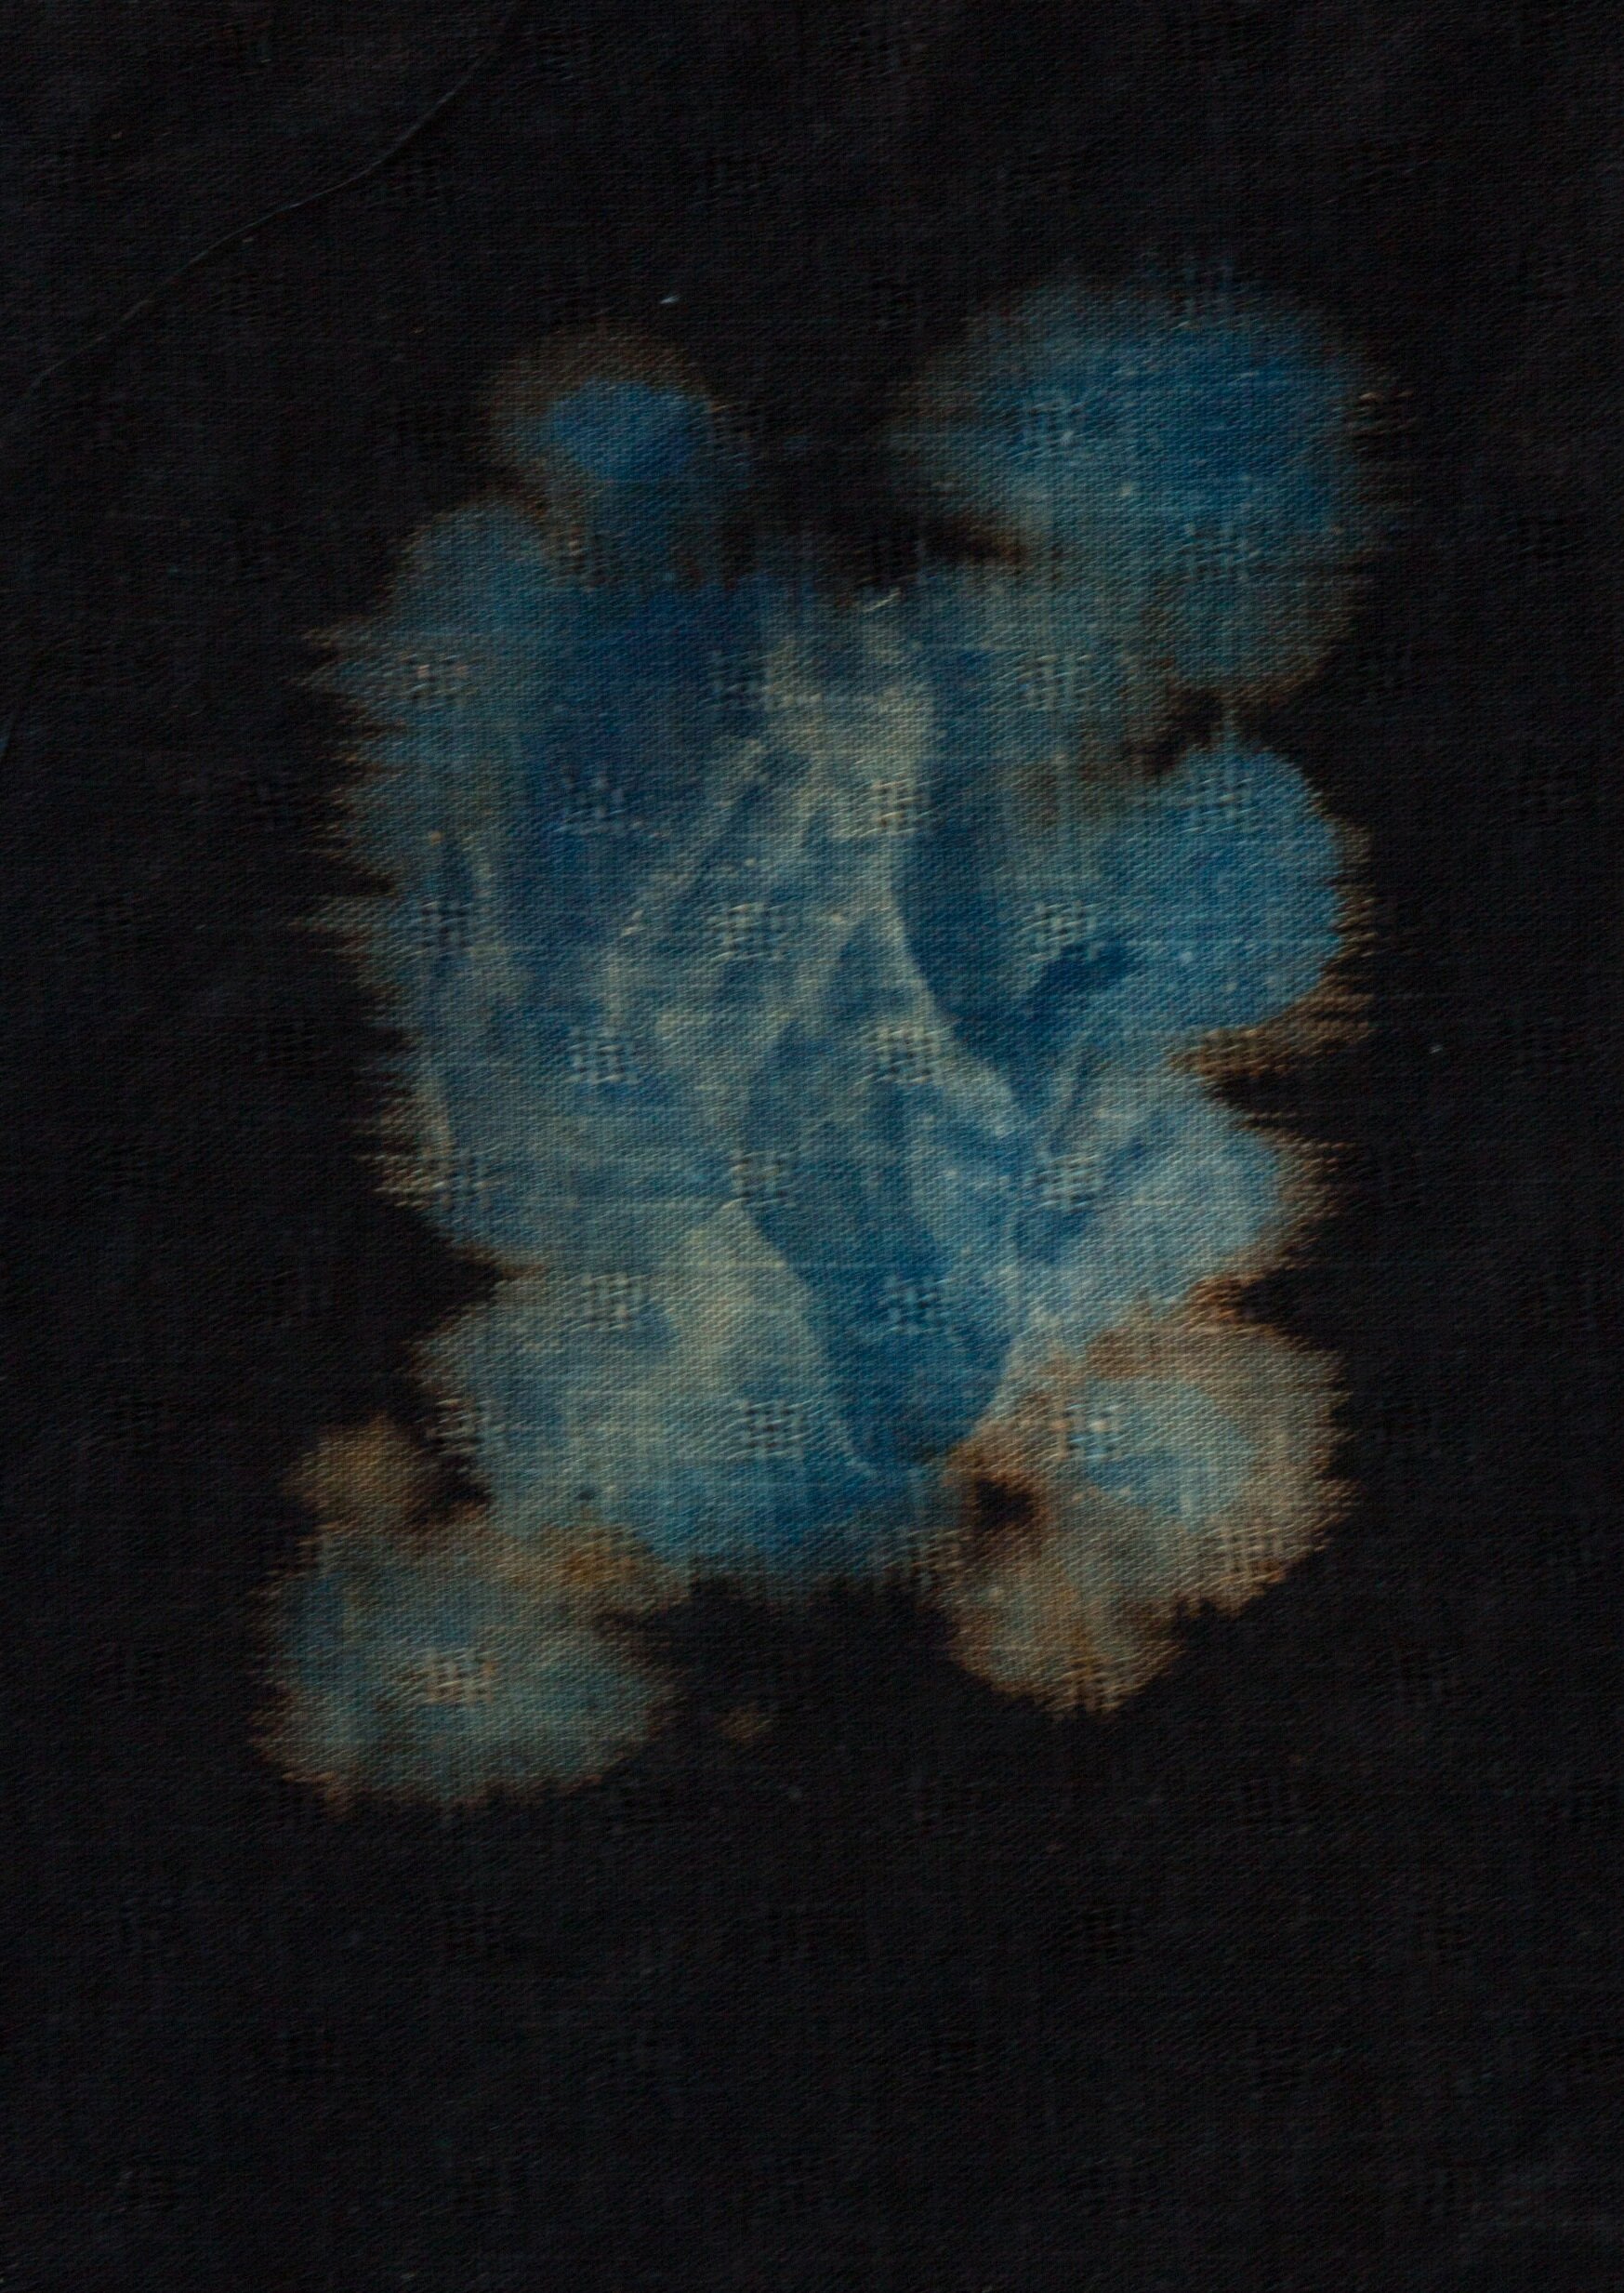  4x5 film contact printed cyanotype on bleached, black linen 